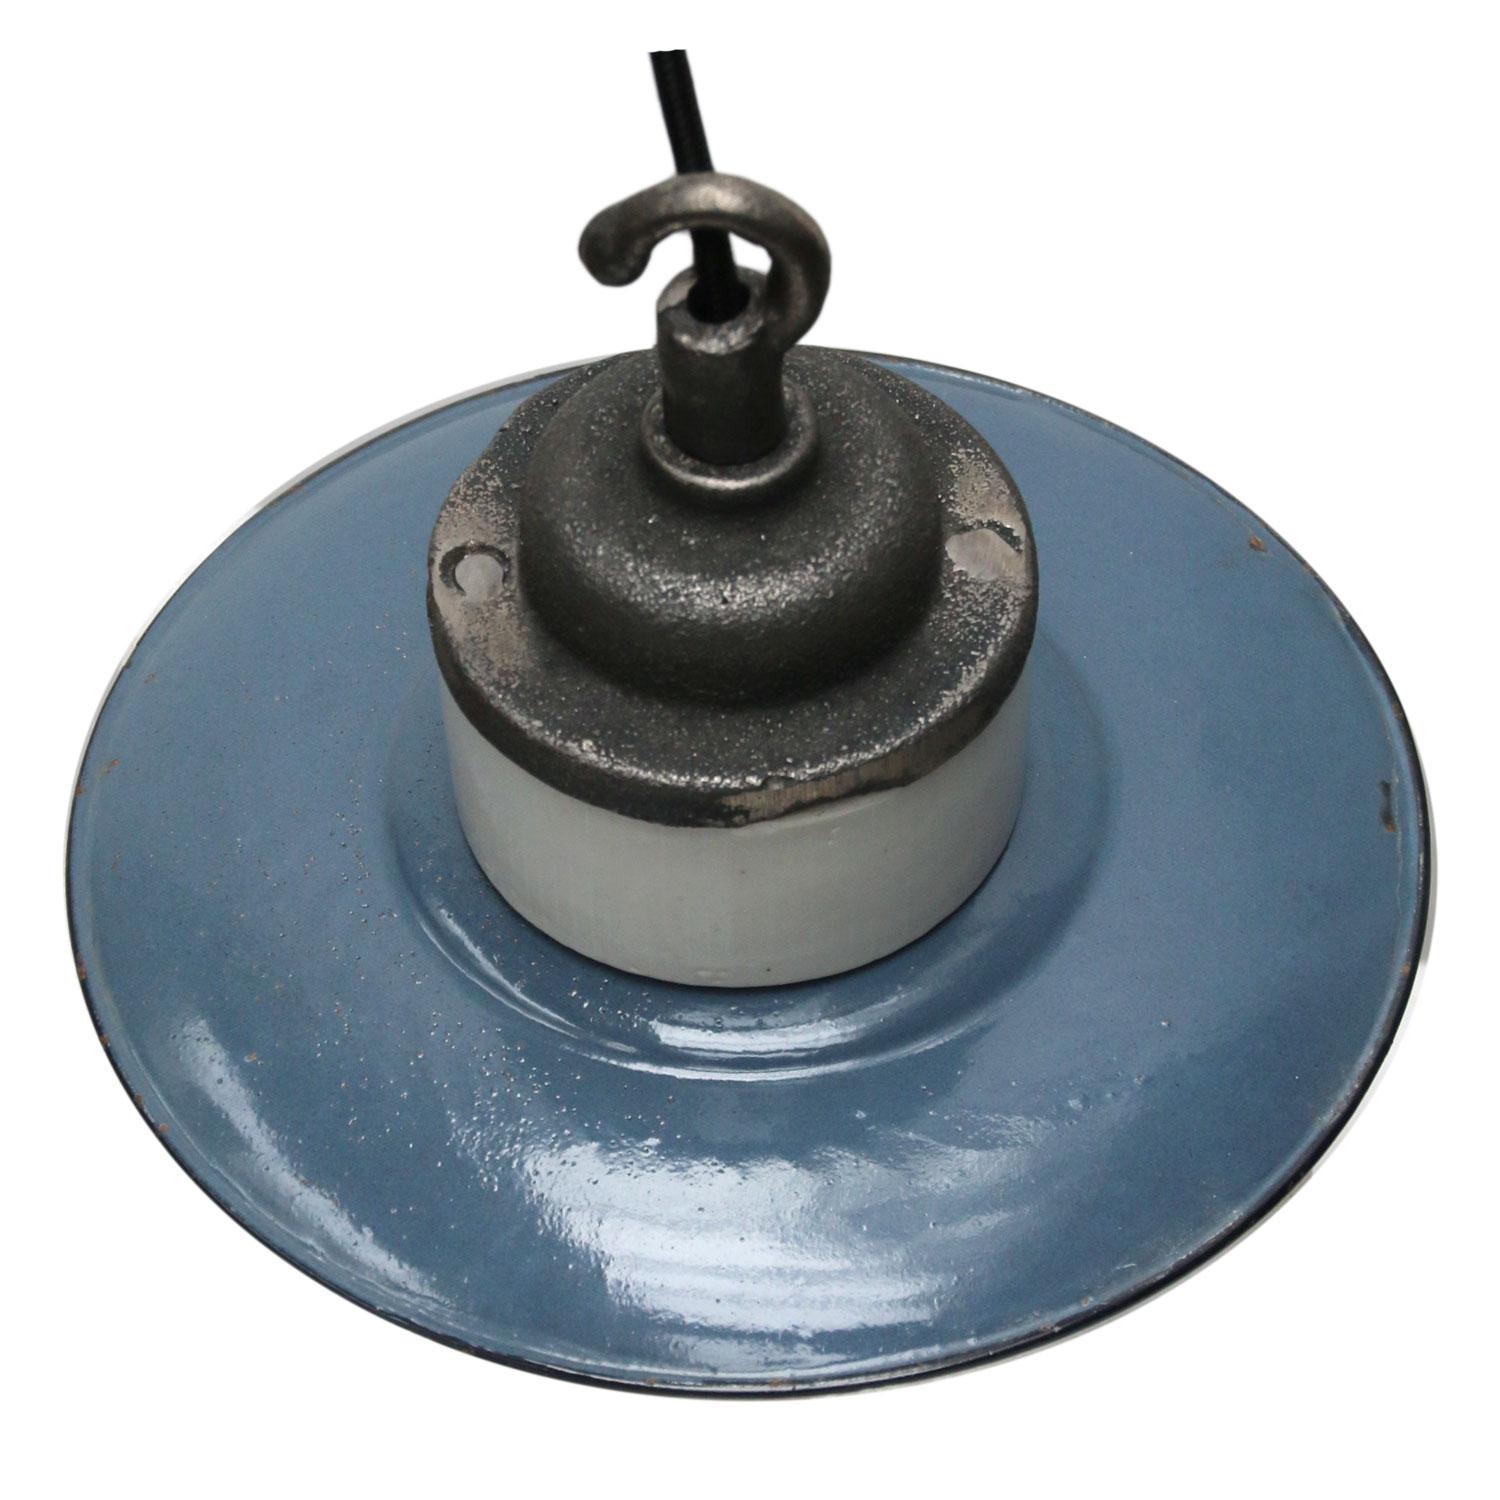 Porcelain Industrial hanging lamp.
White porcelain, cast iron and clear glass.
Blue enamel shade
2 conductors, no ground.

Weight: 1.80 kg / 4 lb

Priced per individual item. All lamps have been made suitable by international standards for